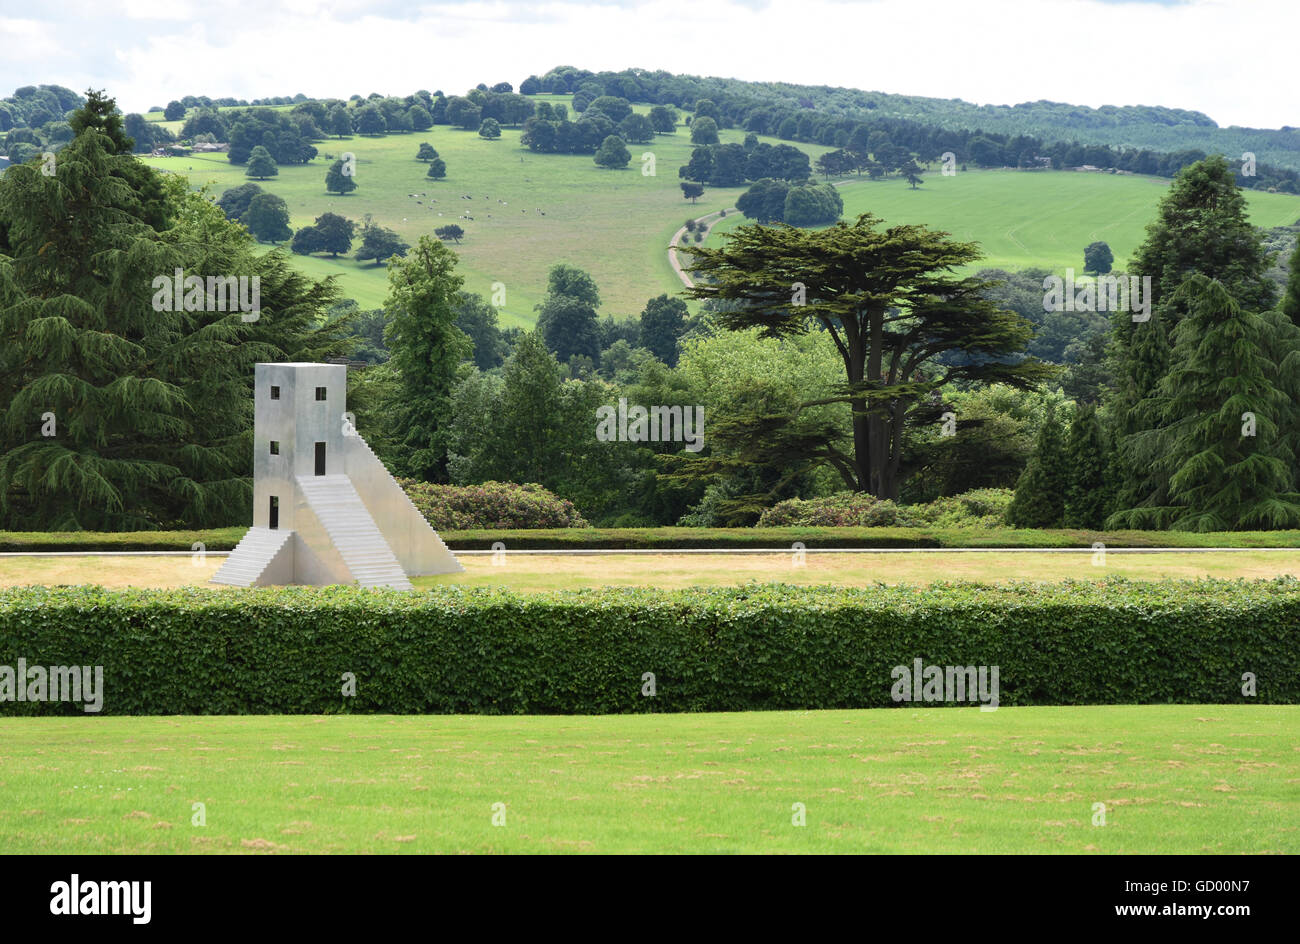 'House To Watch The Sunset' a  sculpture by Not Vital on display in the grounds of The Yorkshire Sculpture Park, UK. (2016) Stock Photo